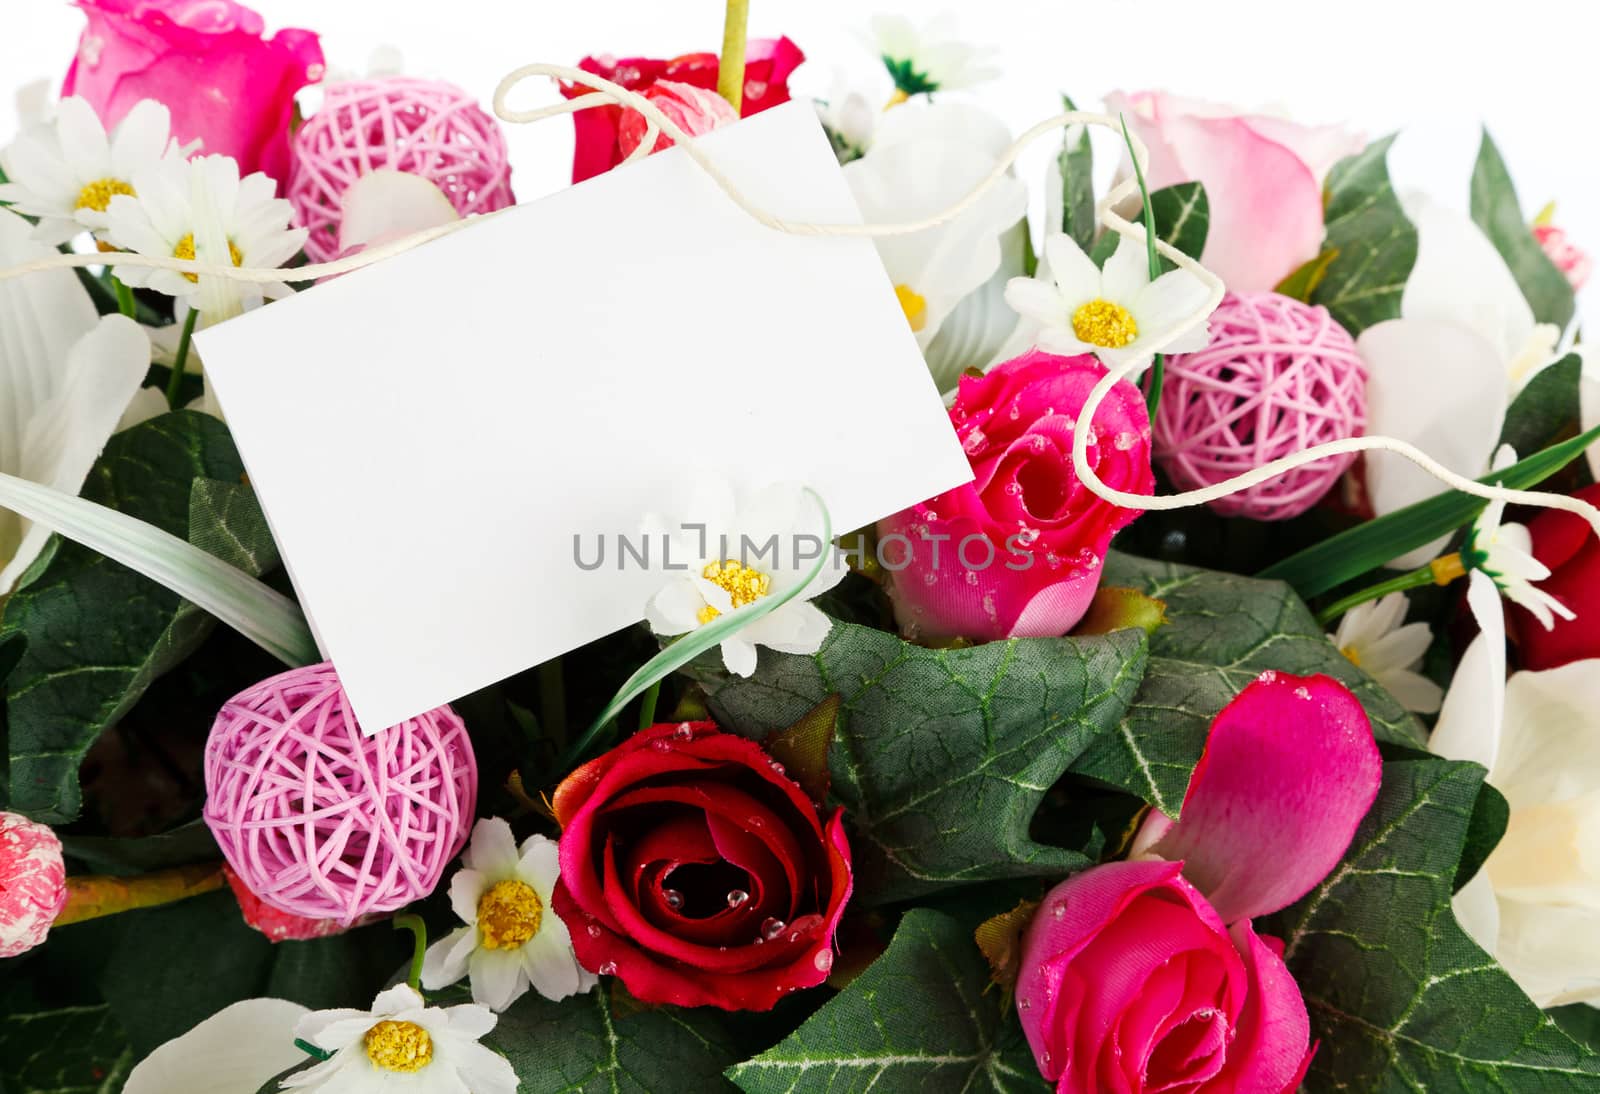 gift card with artifical flowers